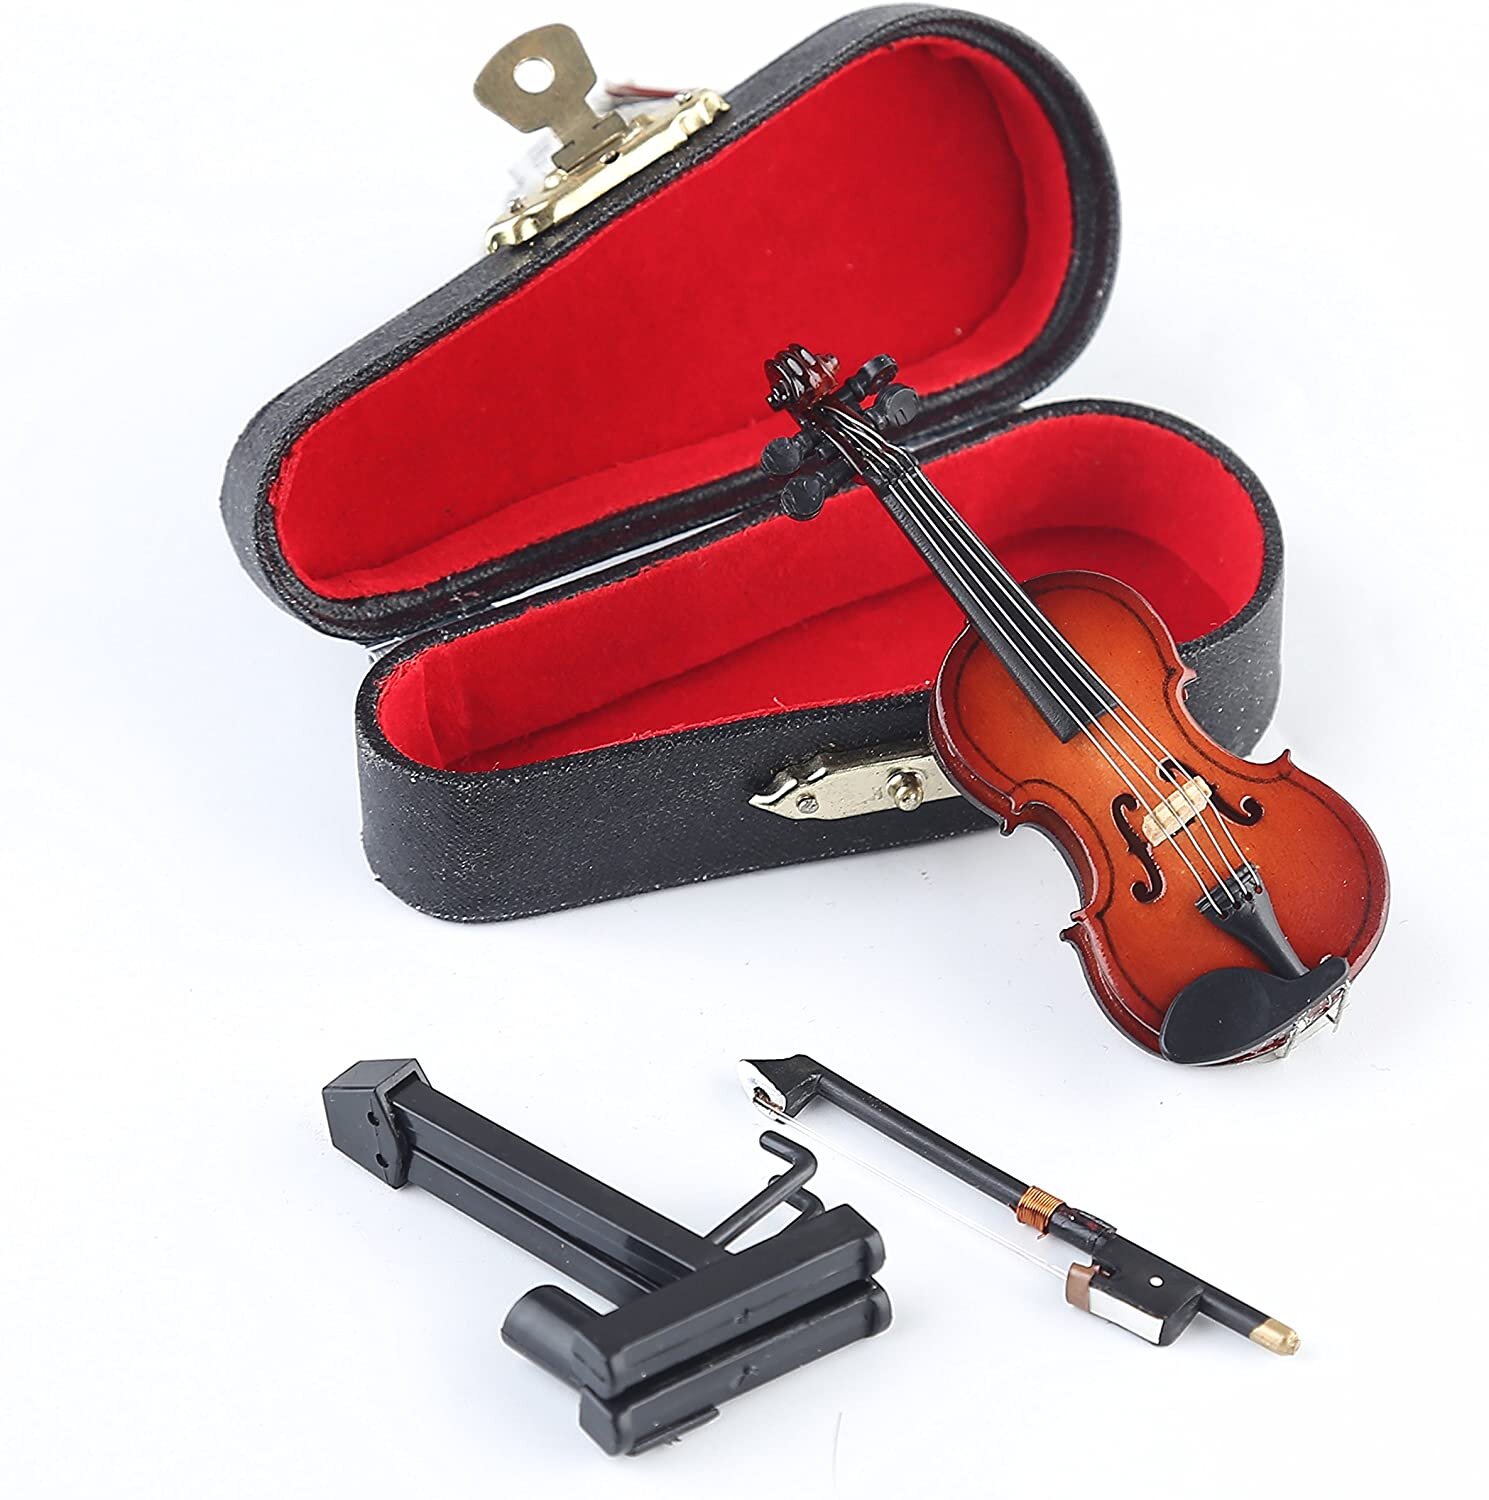 Dselvgvu Wooden Miniature Violin with Stand,Bow and Case Mini Musical Instrument Miniature Dollhouse Model Home Decoration (3.15"x1.18"x0.59")